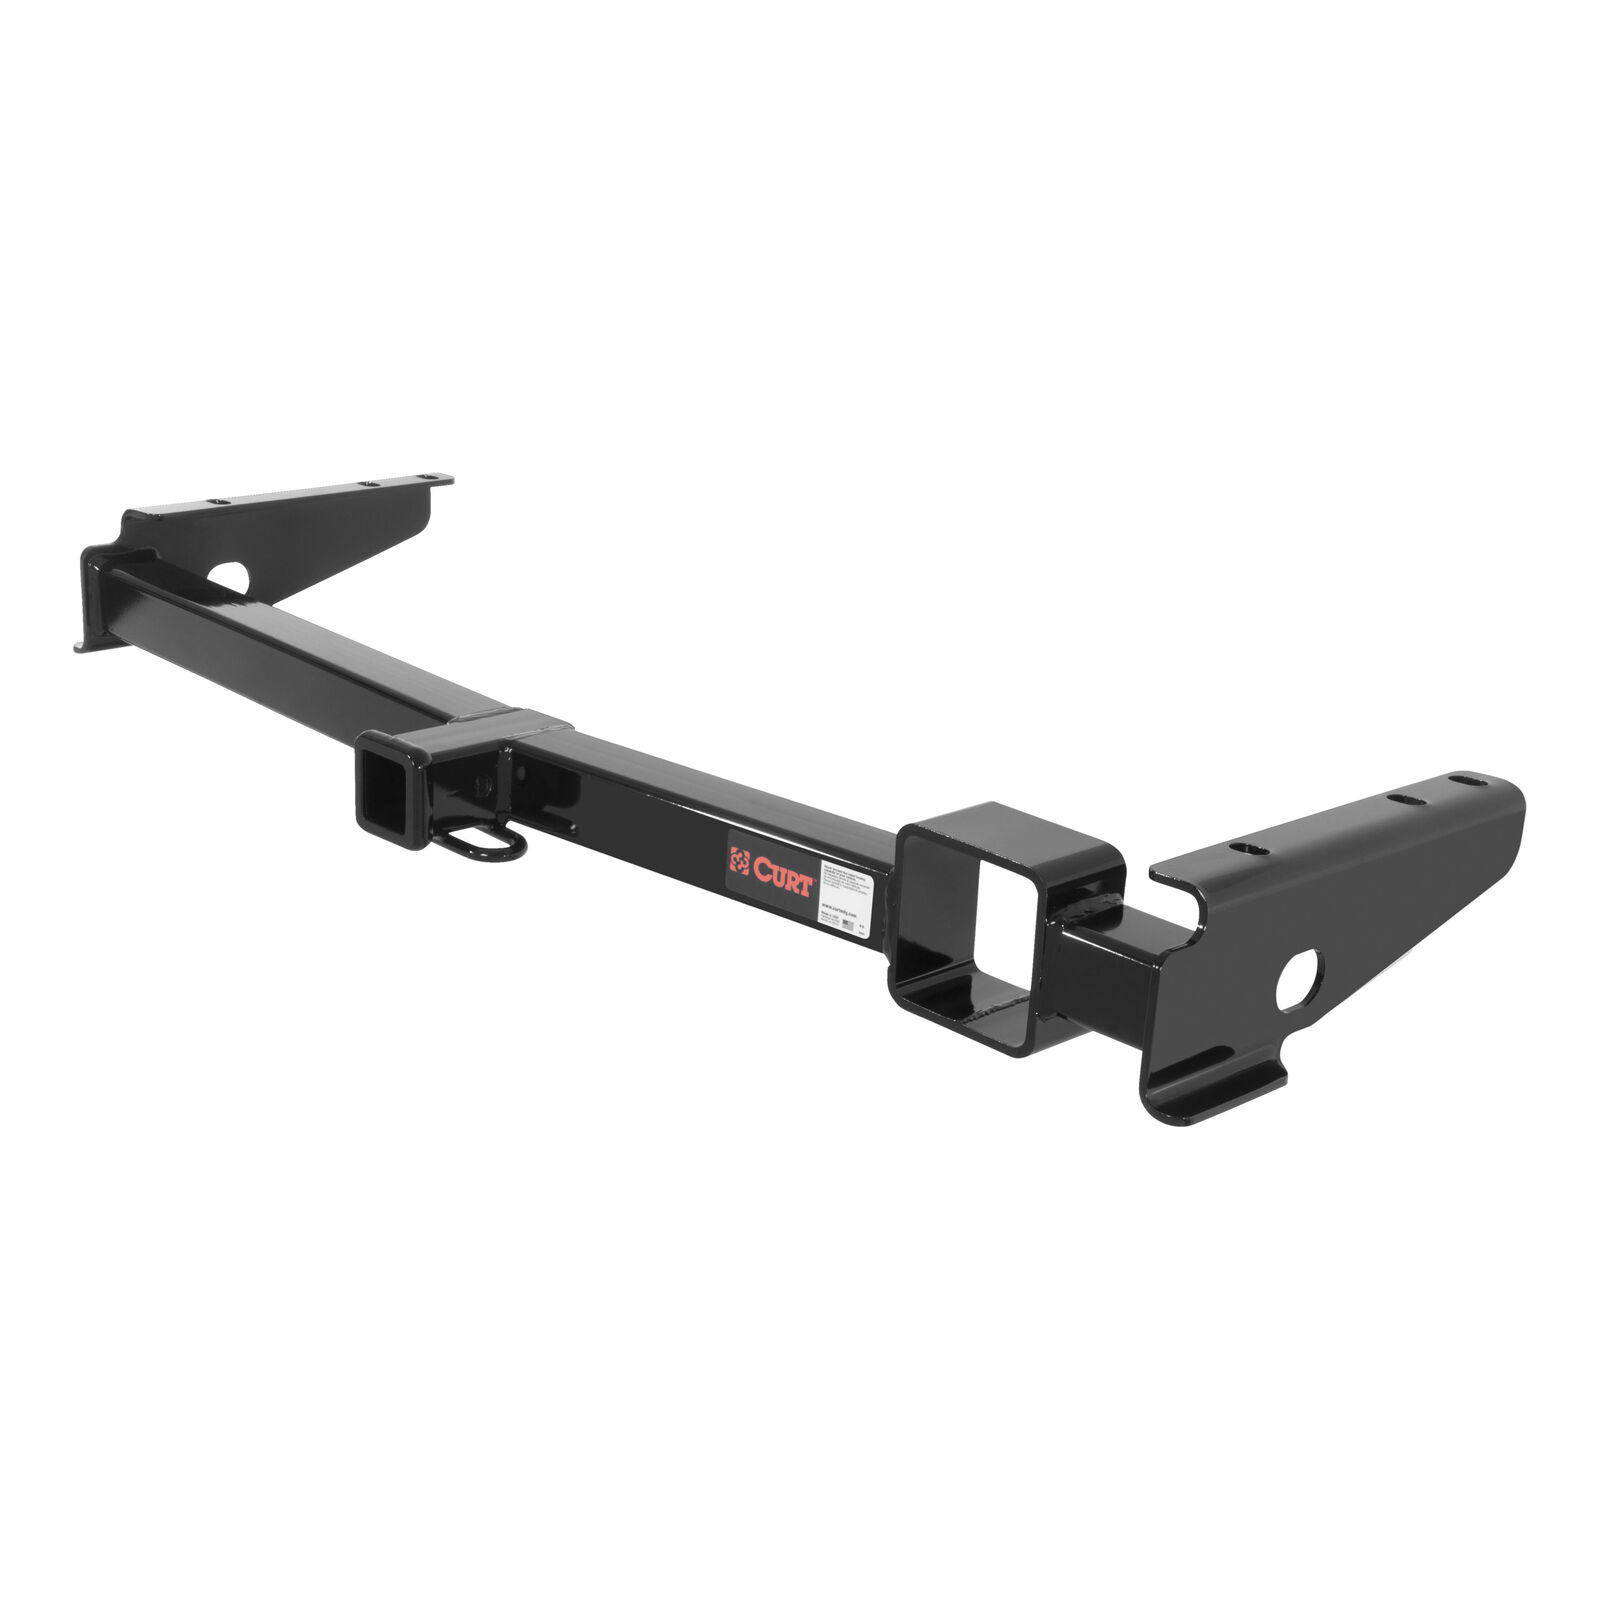 Curt Class 3 Trailer Hitch with 2" Receiver x 13443